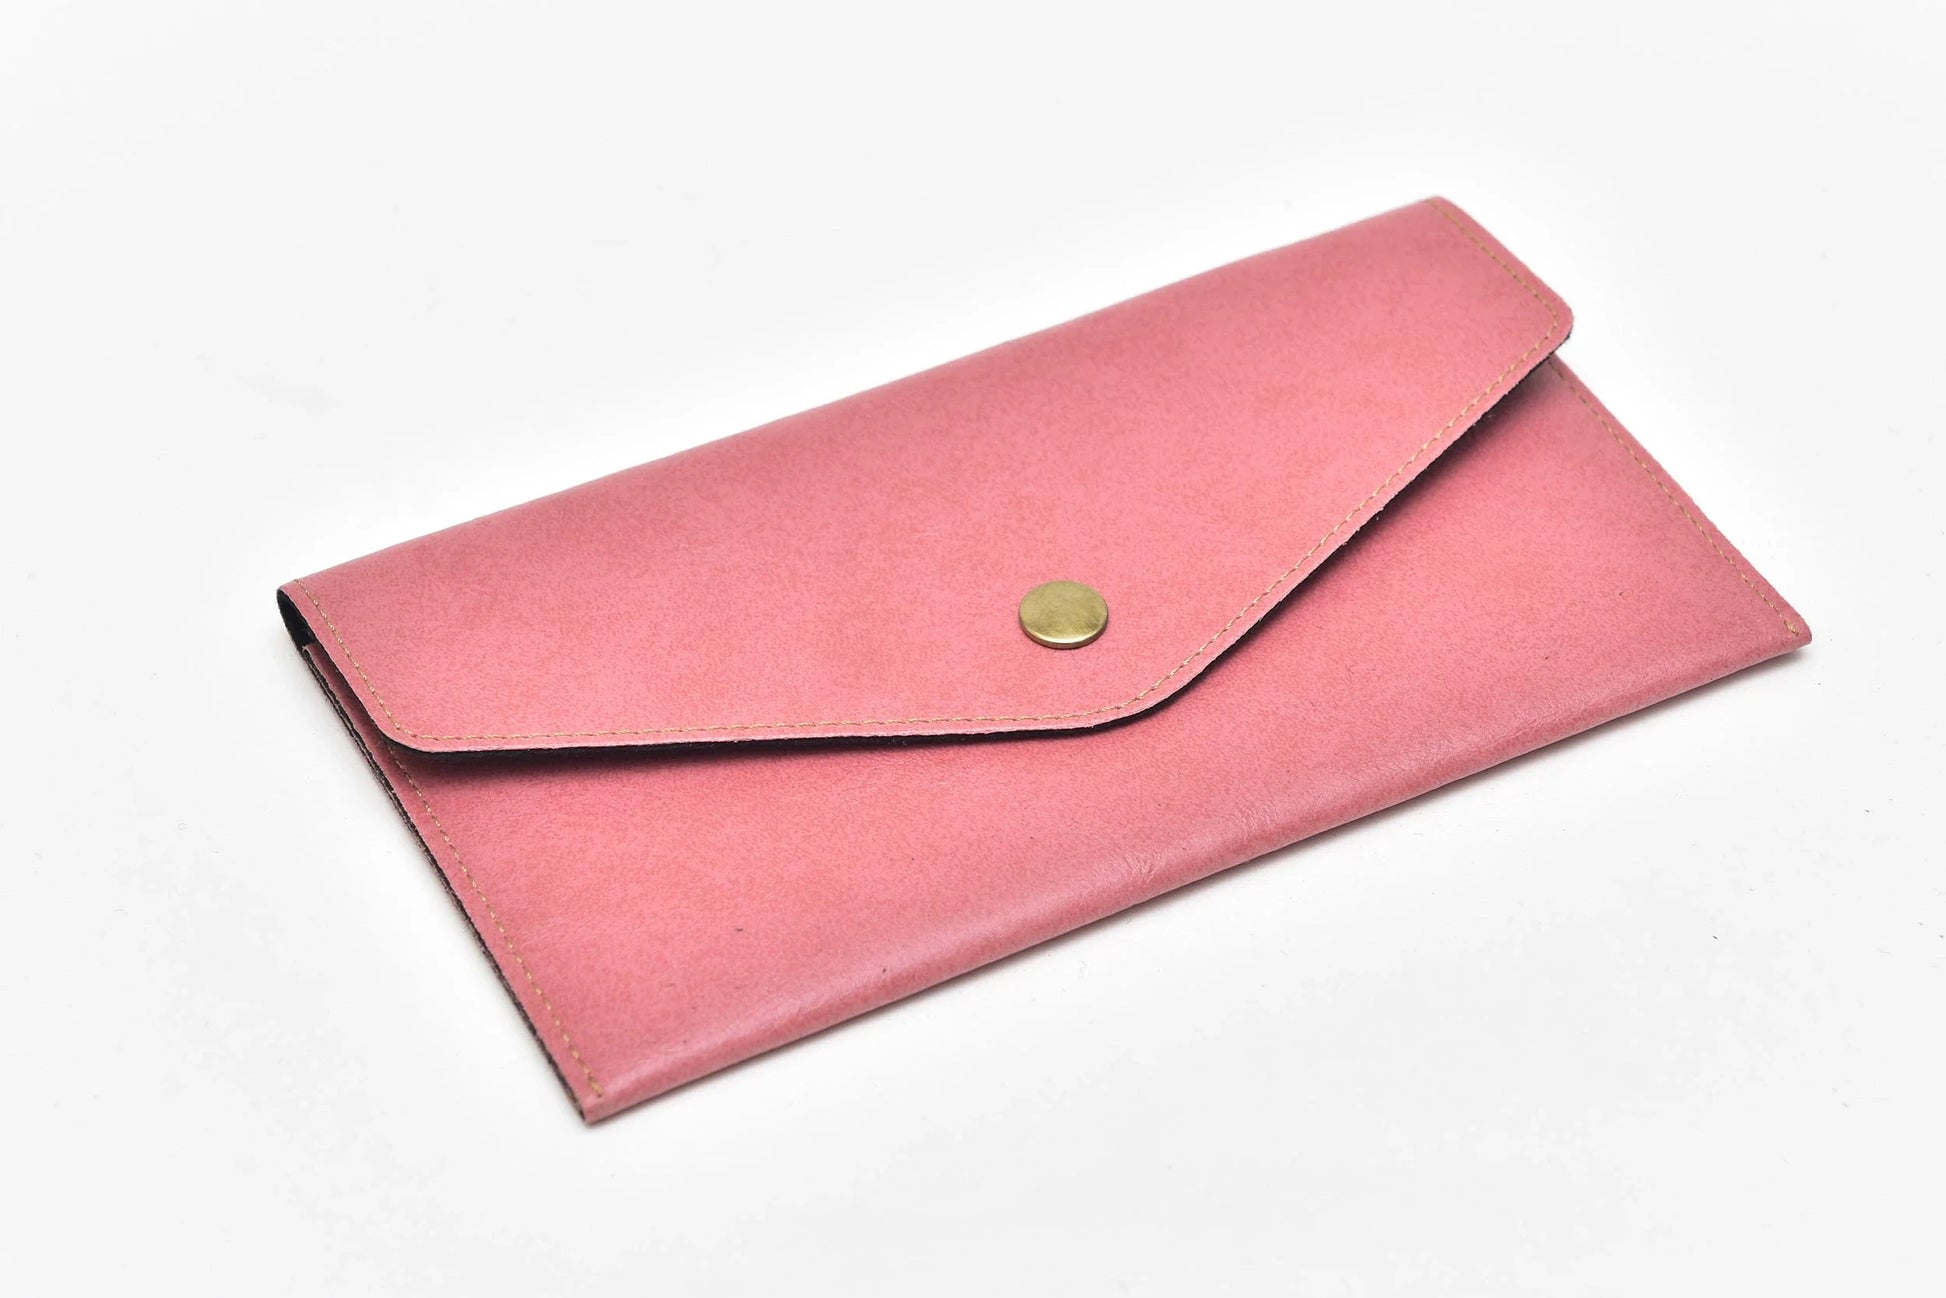 A timeless classic, this personalized leather clutch is the perfect accessory to complement any outfit. With ample space for your essentials and personalized options, it’s a must-have.